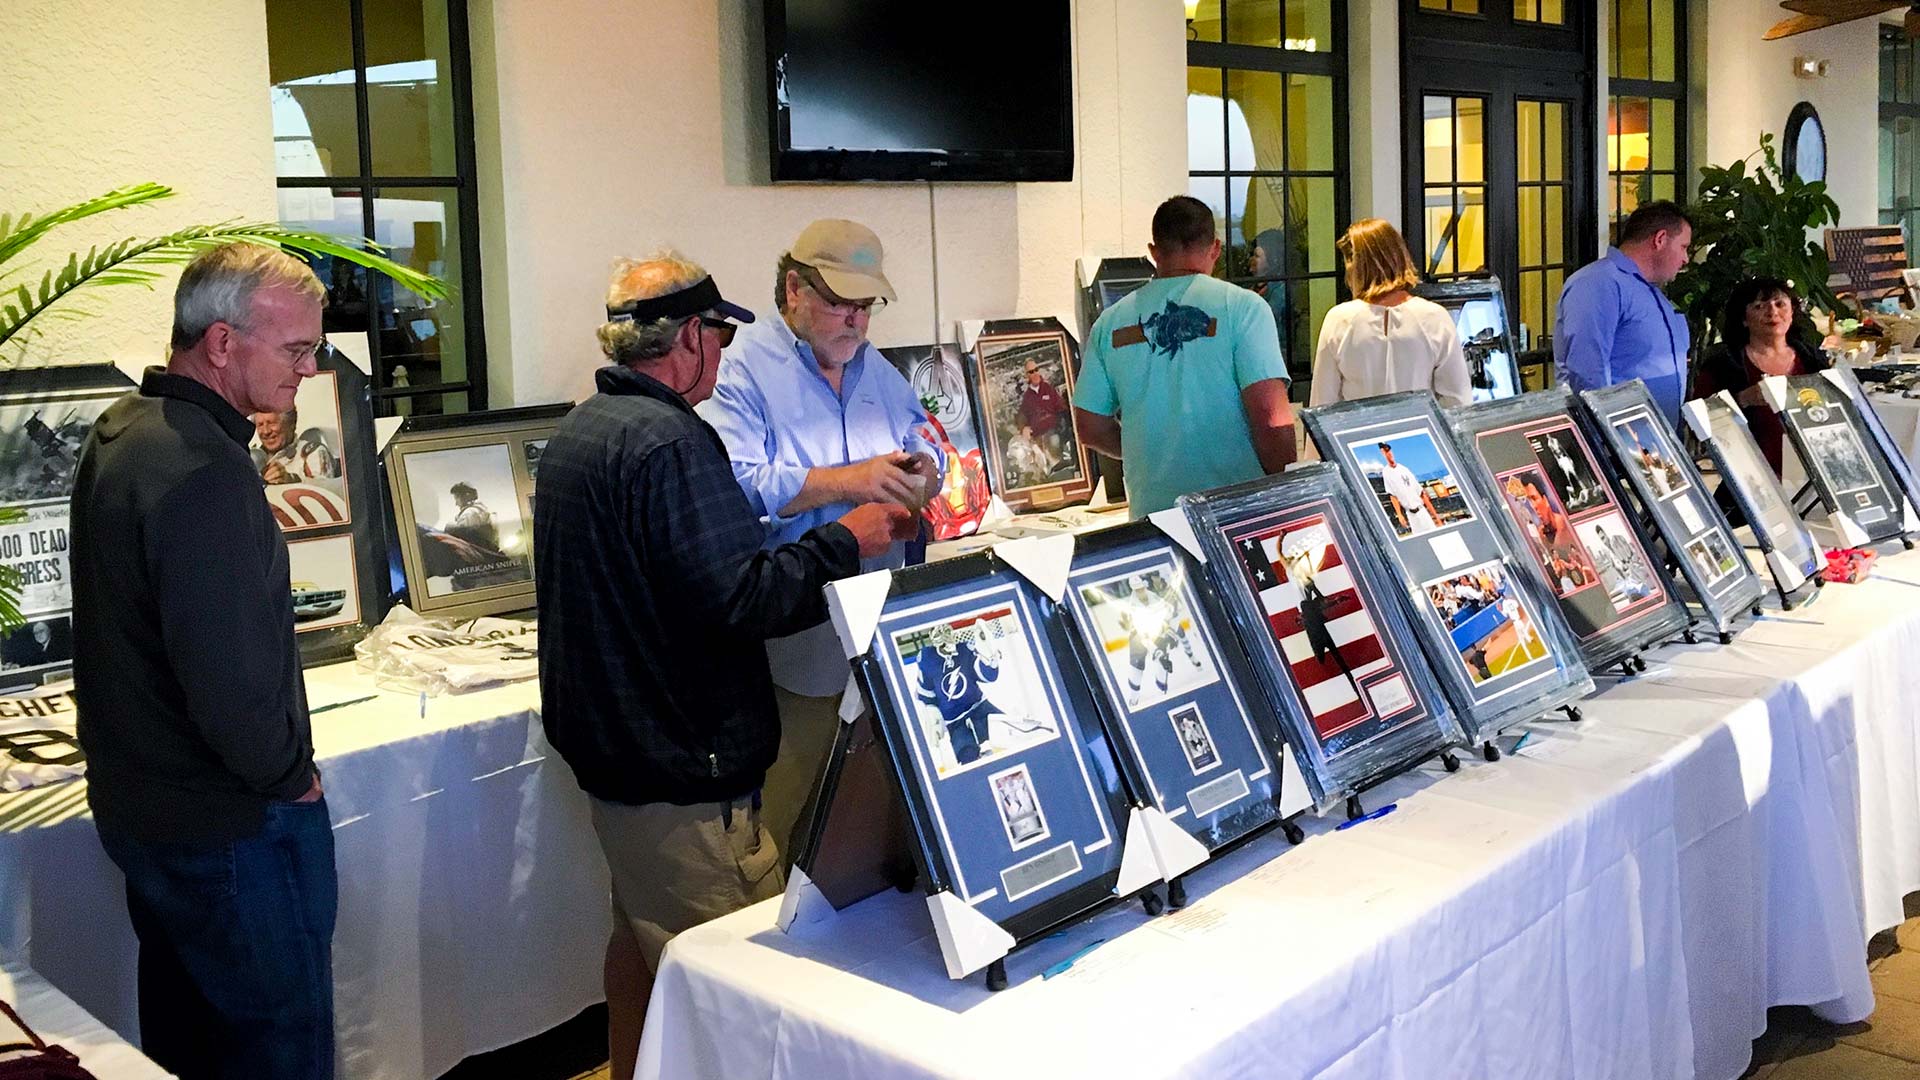 People looking at items at an event run by SociallyFunded